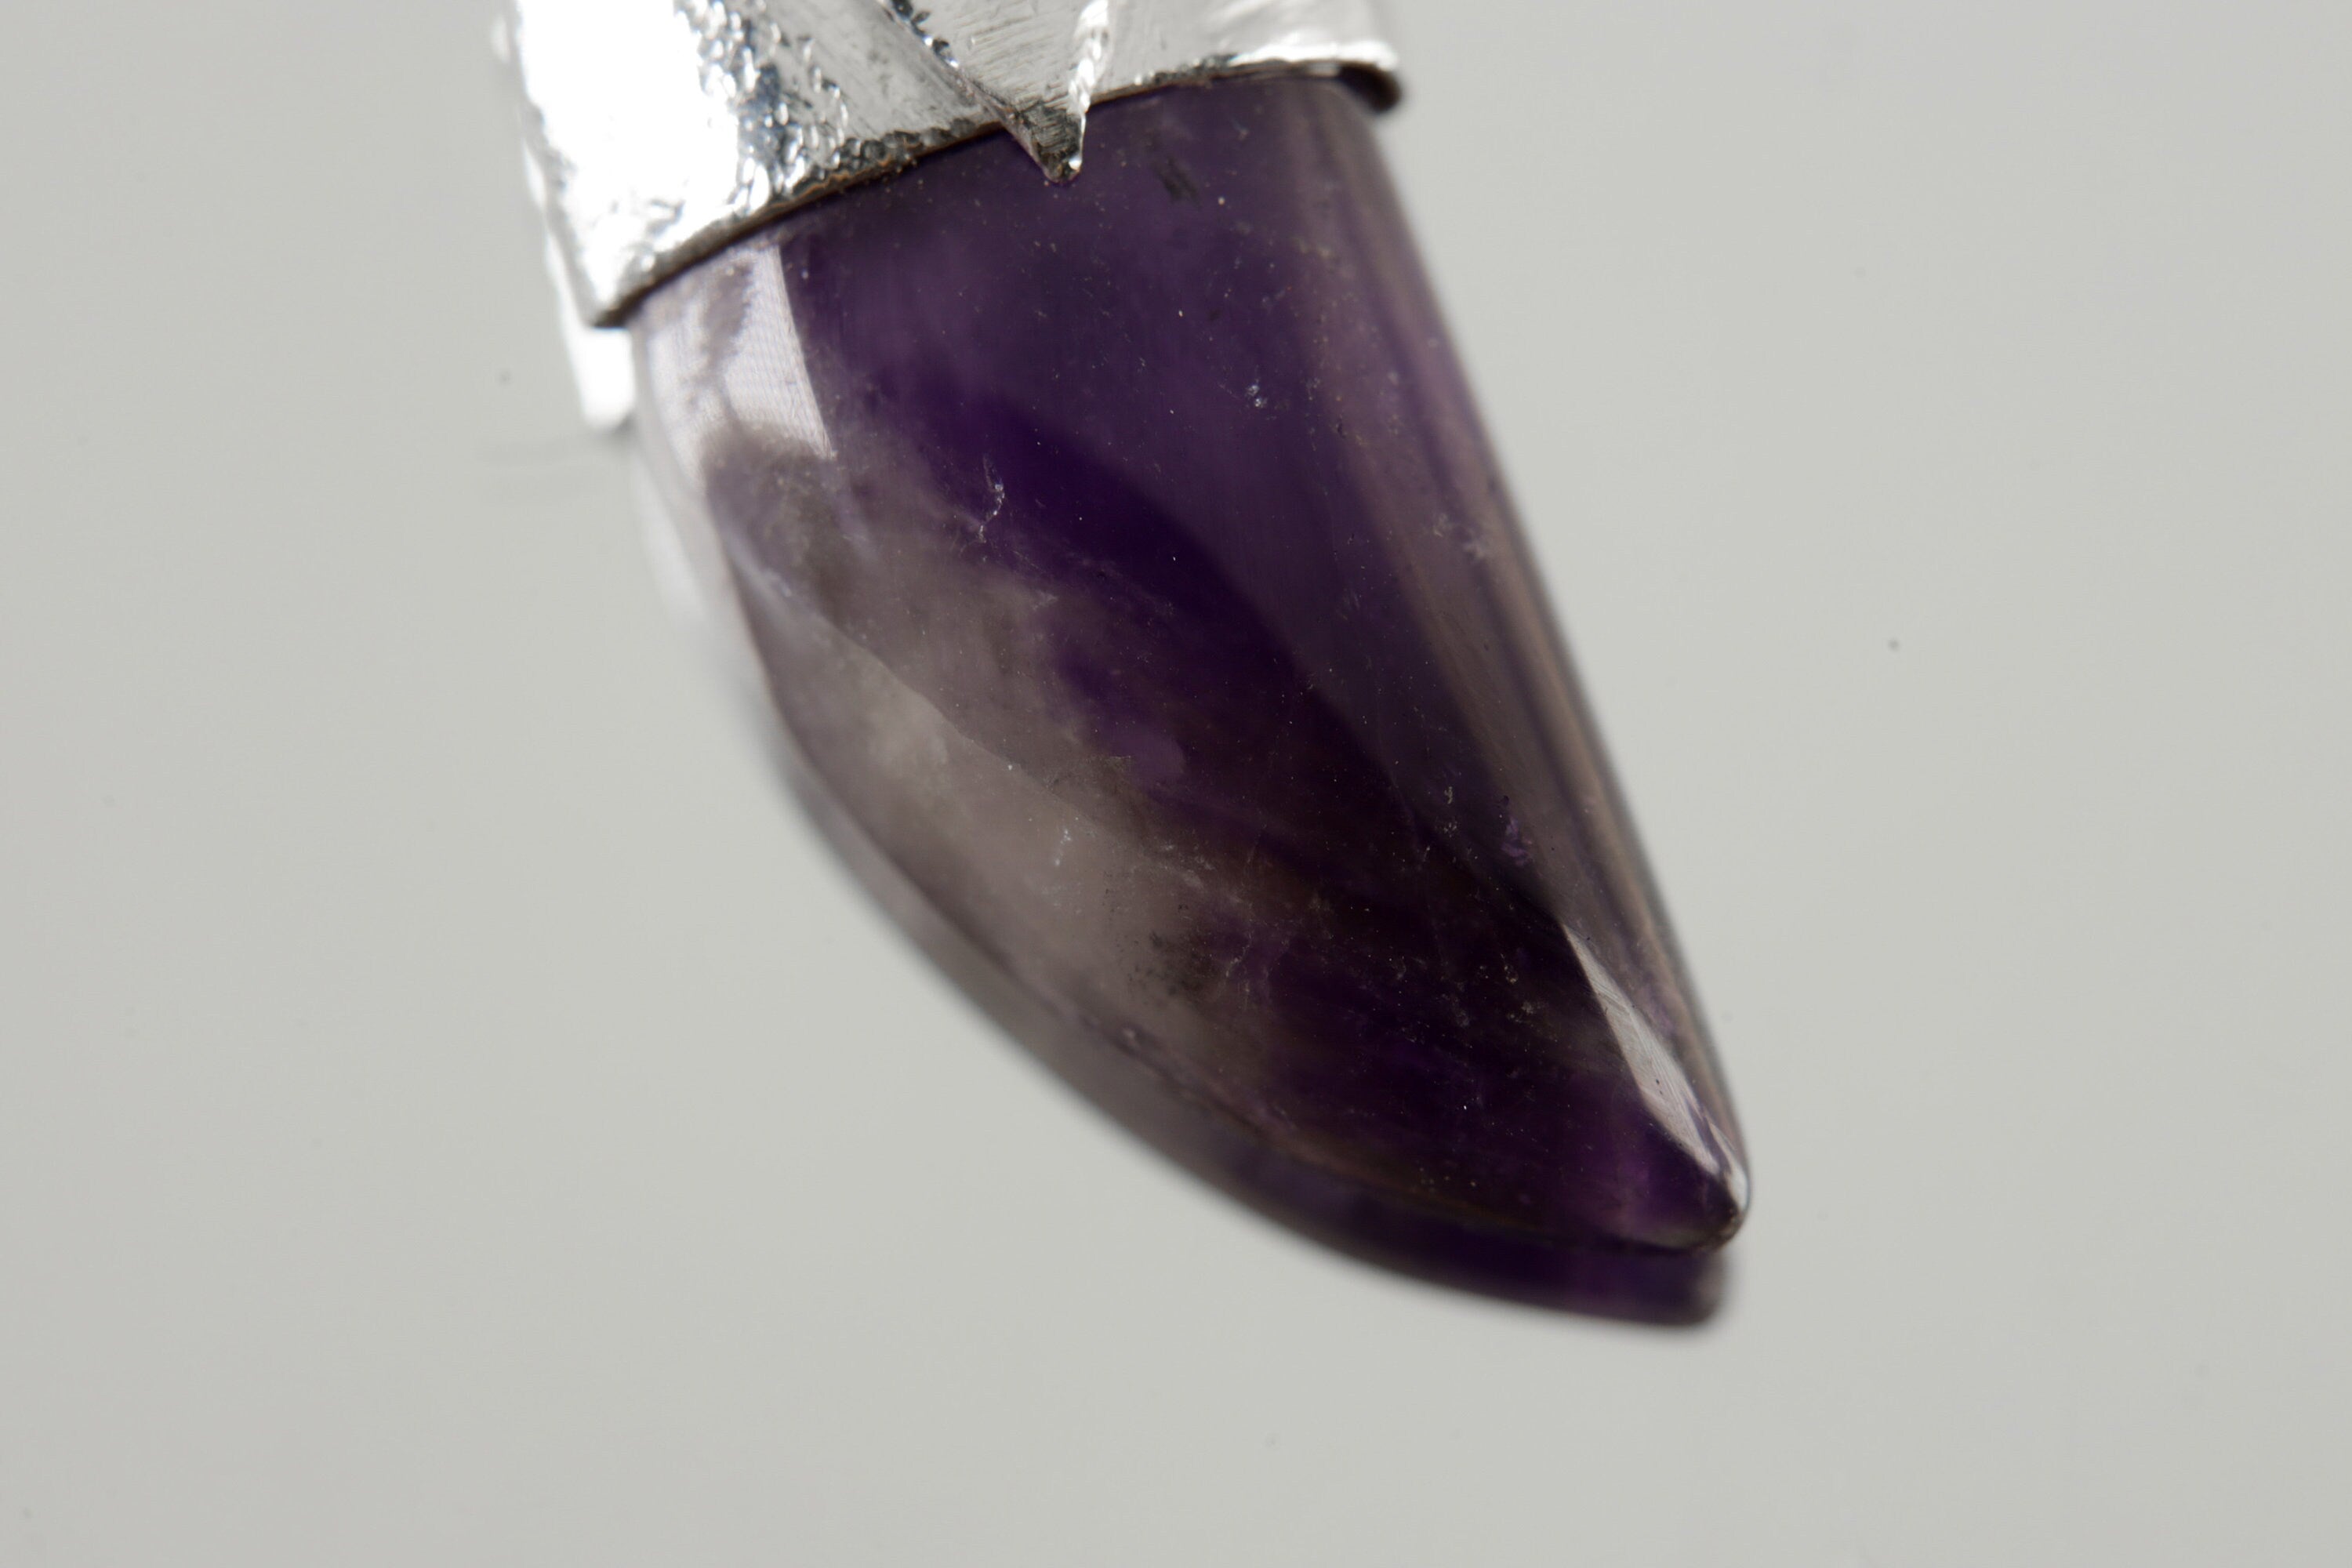 Tooth Shaped Amethyst Cabochon - Stack Pendant - Organic Textured 925 Sterling Silver - Crystal Necklace